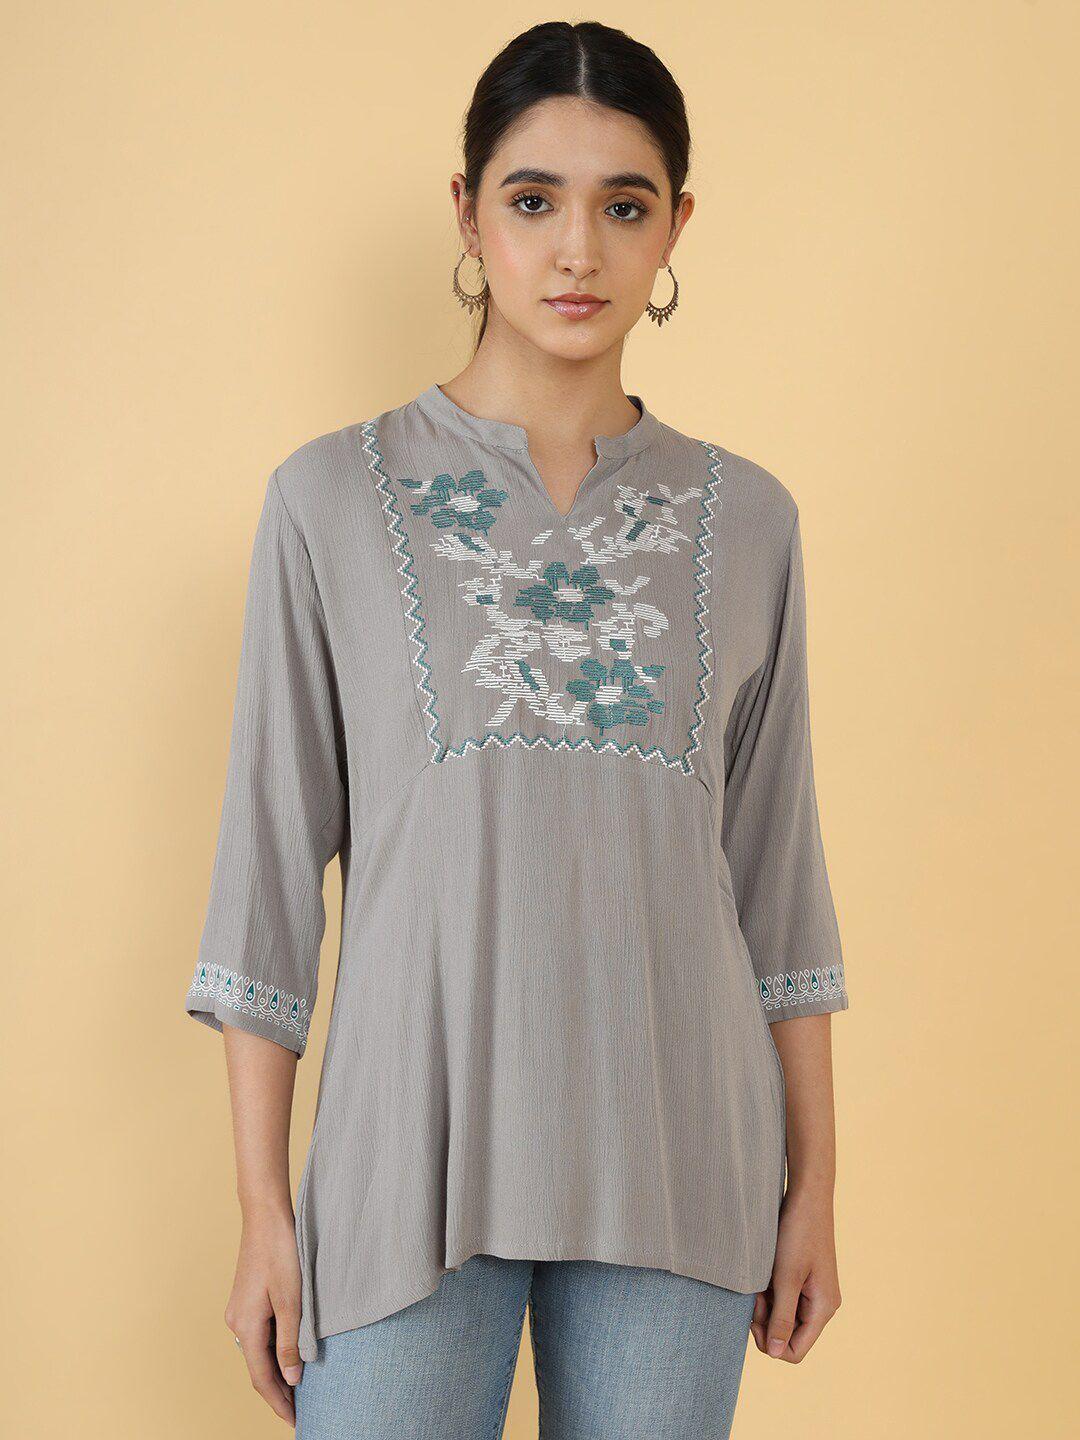 soch-grey-&-white-embroidered-tunic